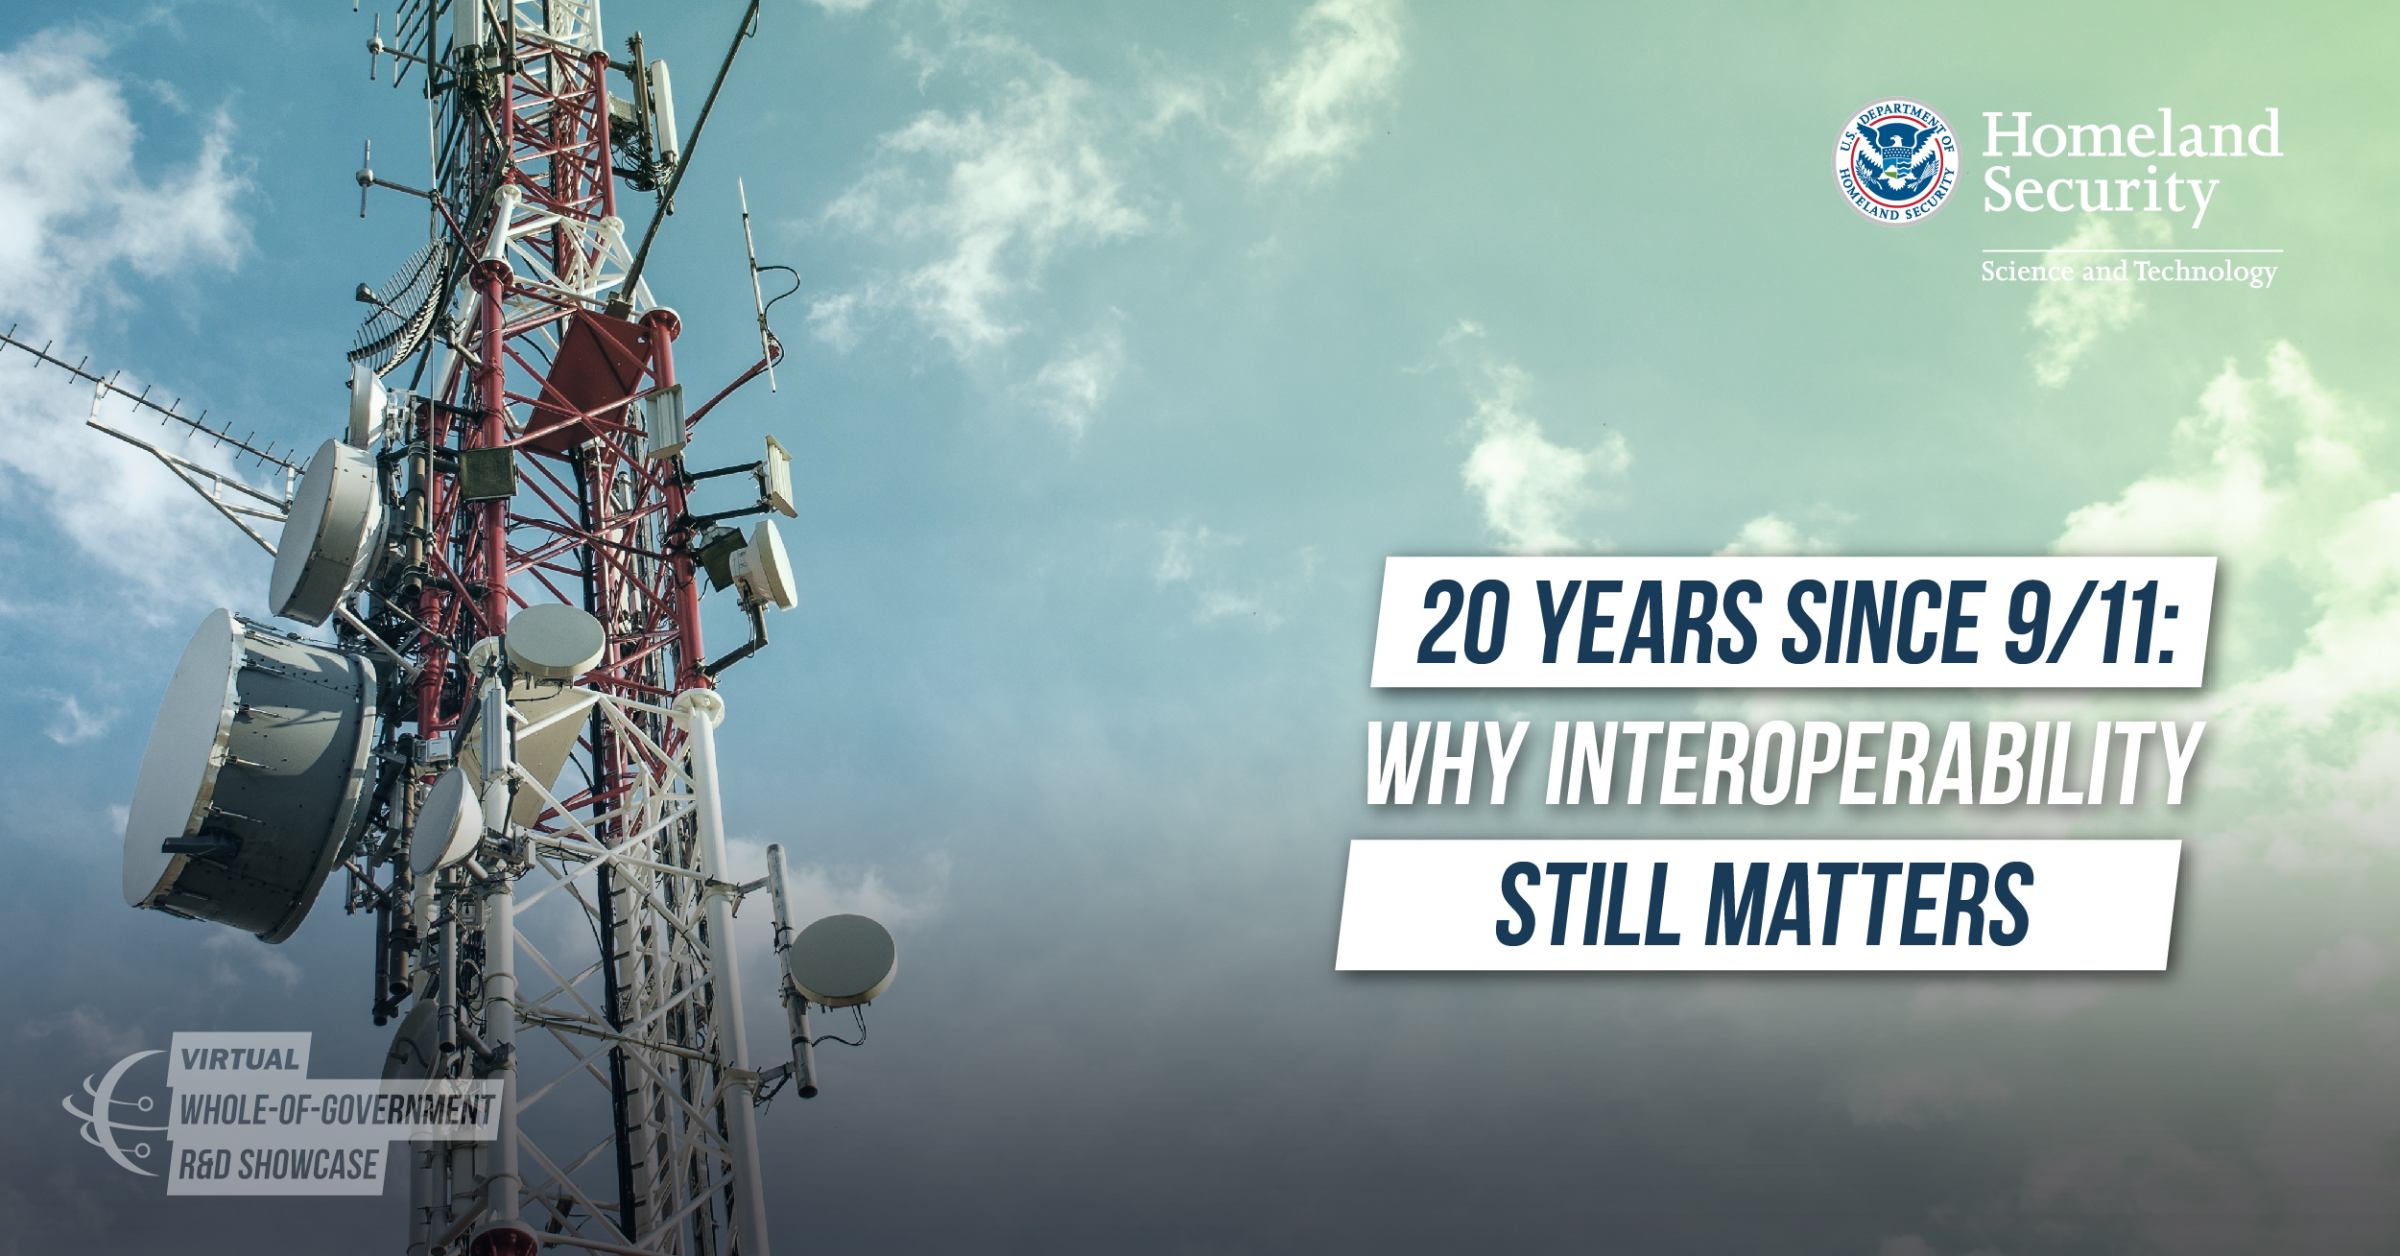 Expert Panel 1: 20 Years Since 9/11: Why Interoperability Still Matters